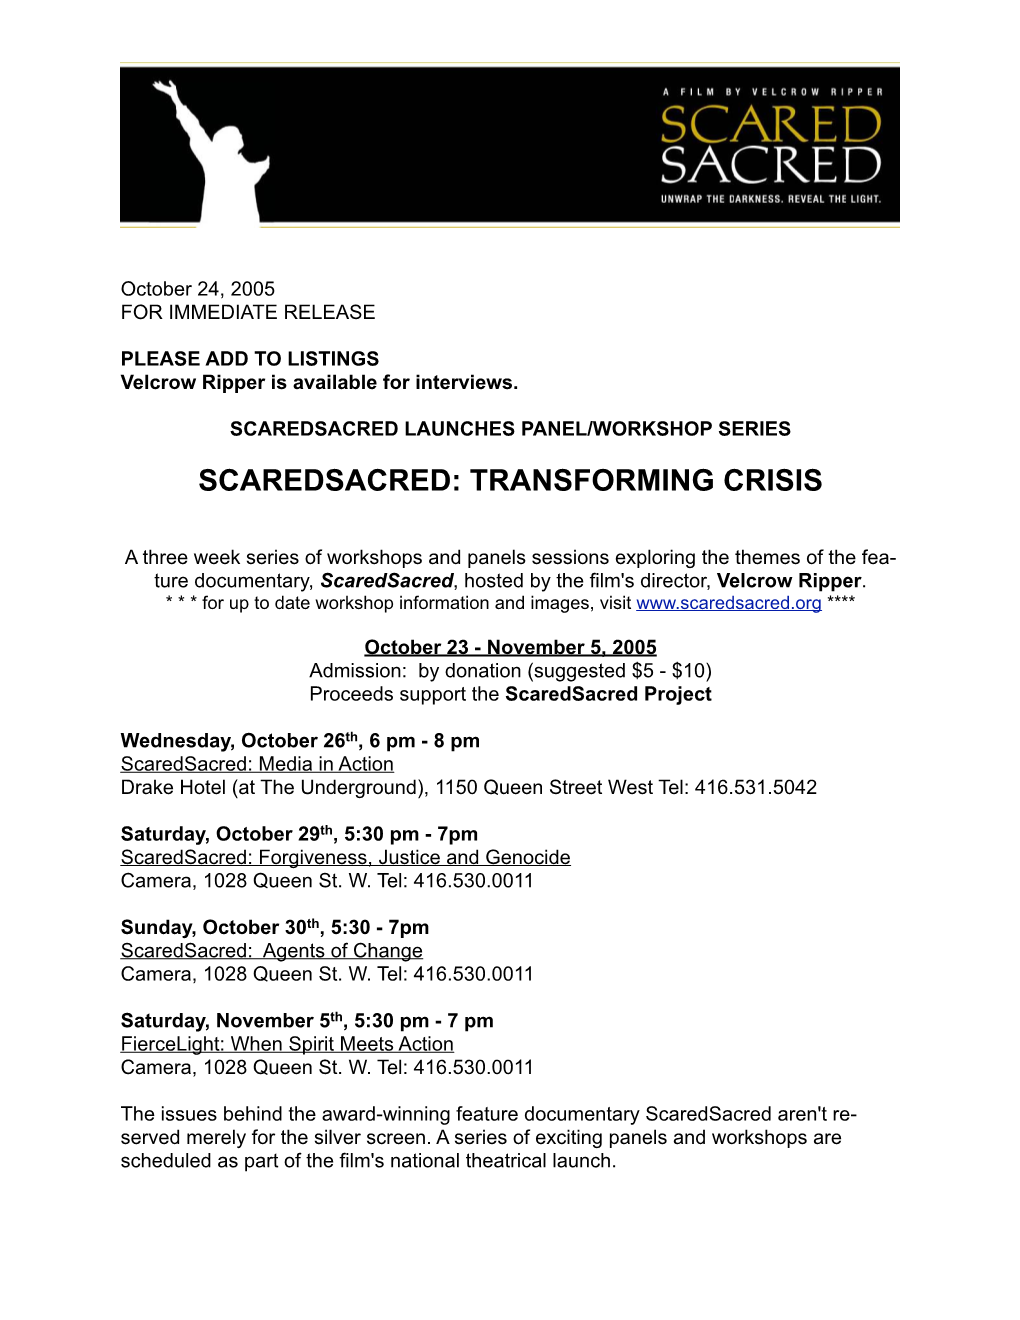 Oct 24, '05 Scaredsacred Launches Panel/Workshop Series: Transforming Crisis